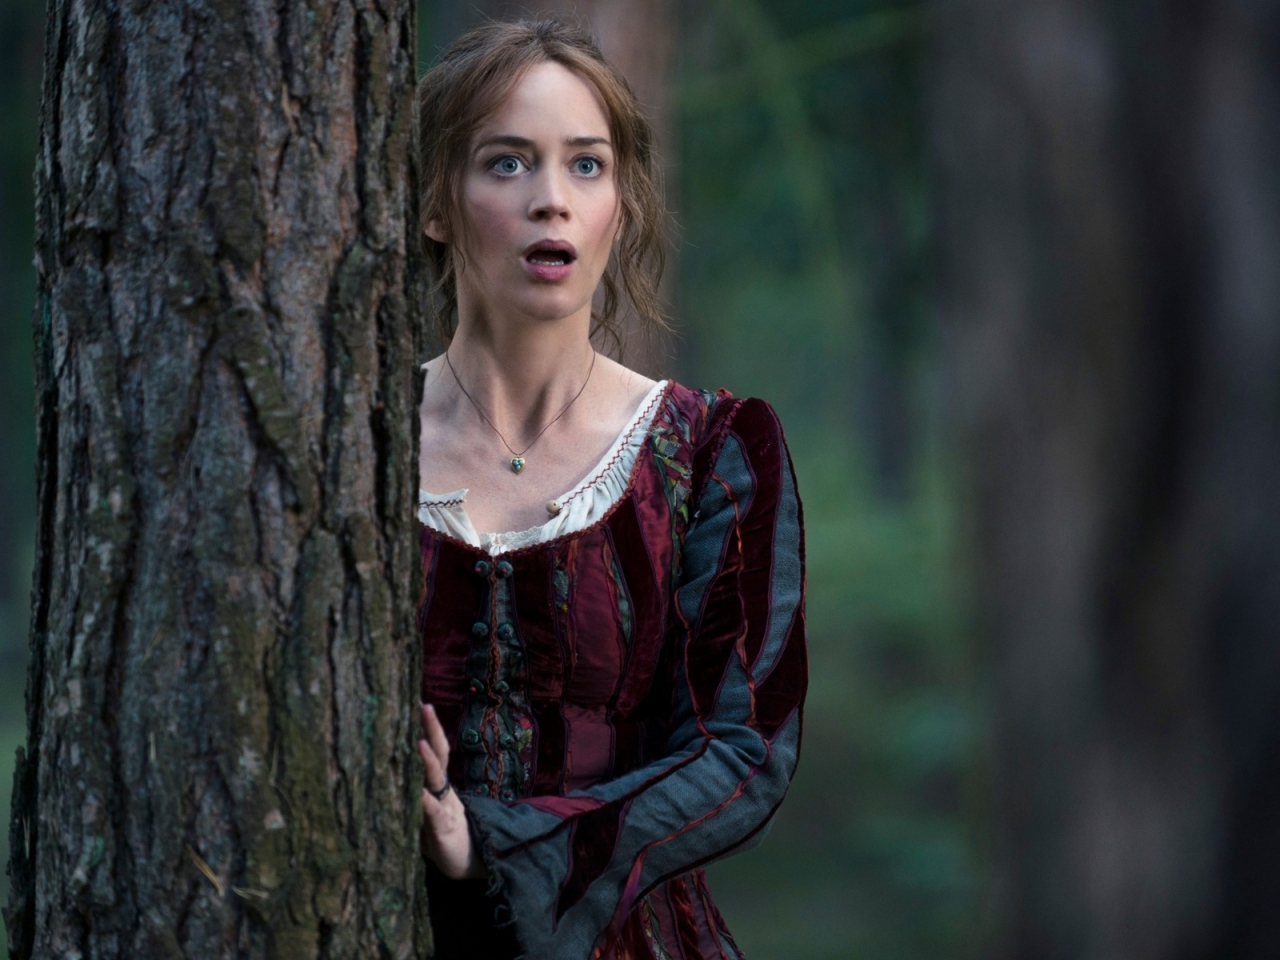 Into the Woods Emily Blunt for 1280 x 960 resolution